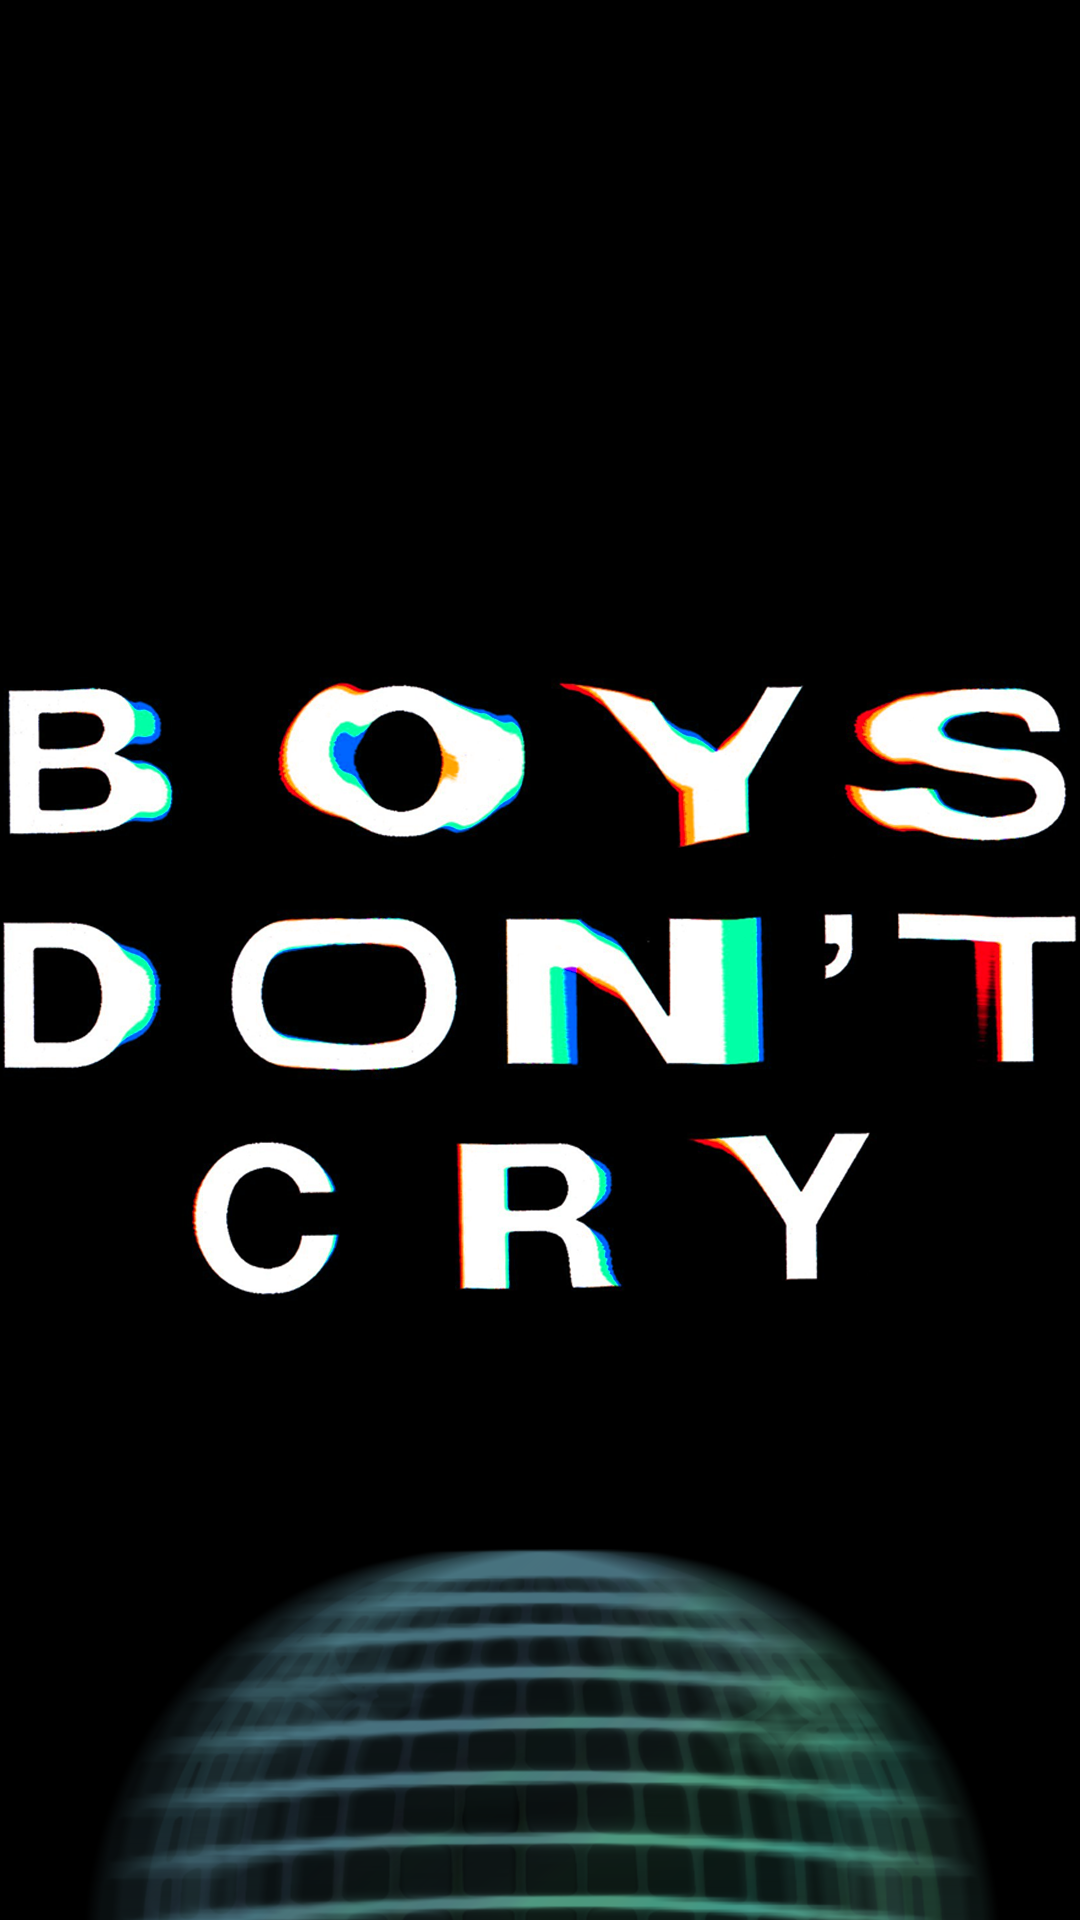 Wallpaper. Boys don't cry, Phone wallpaper, Dont cry